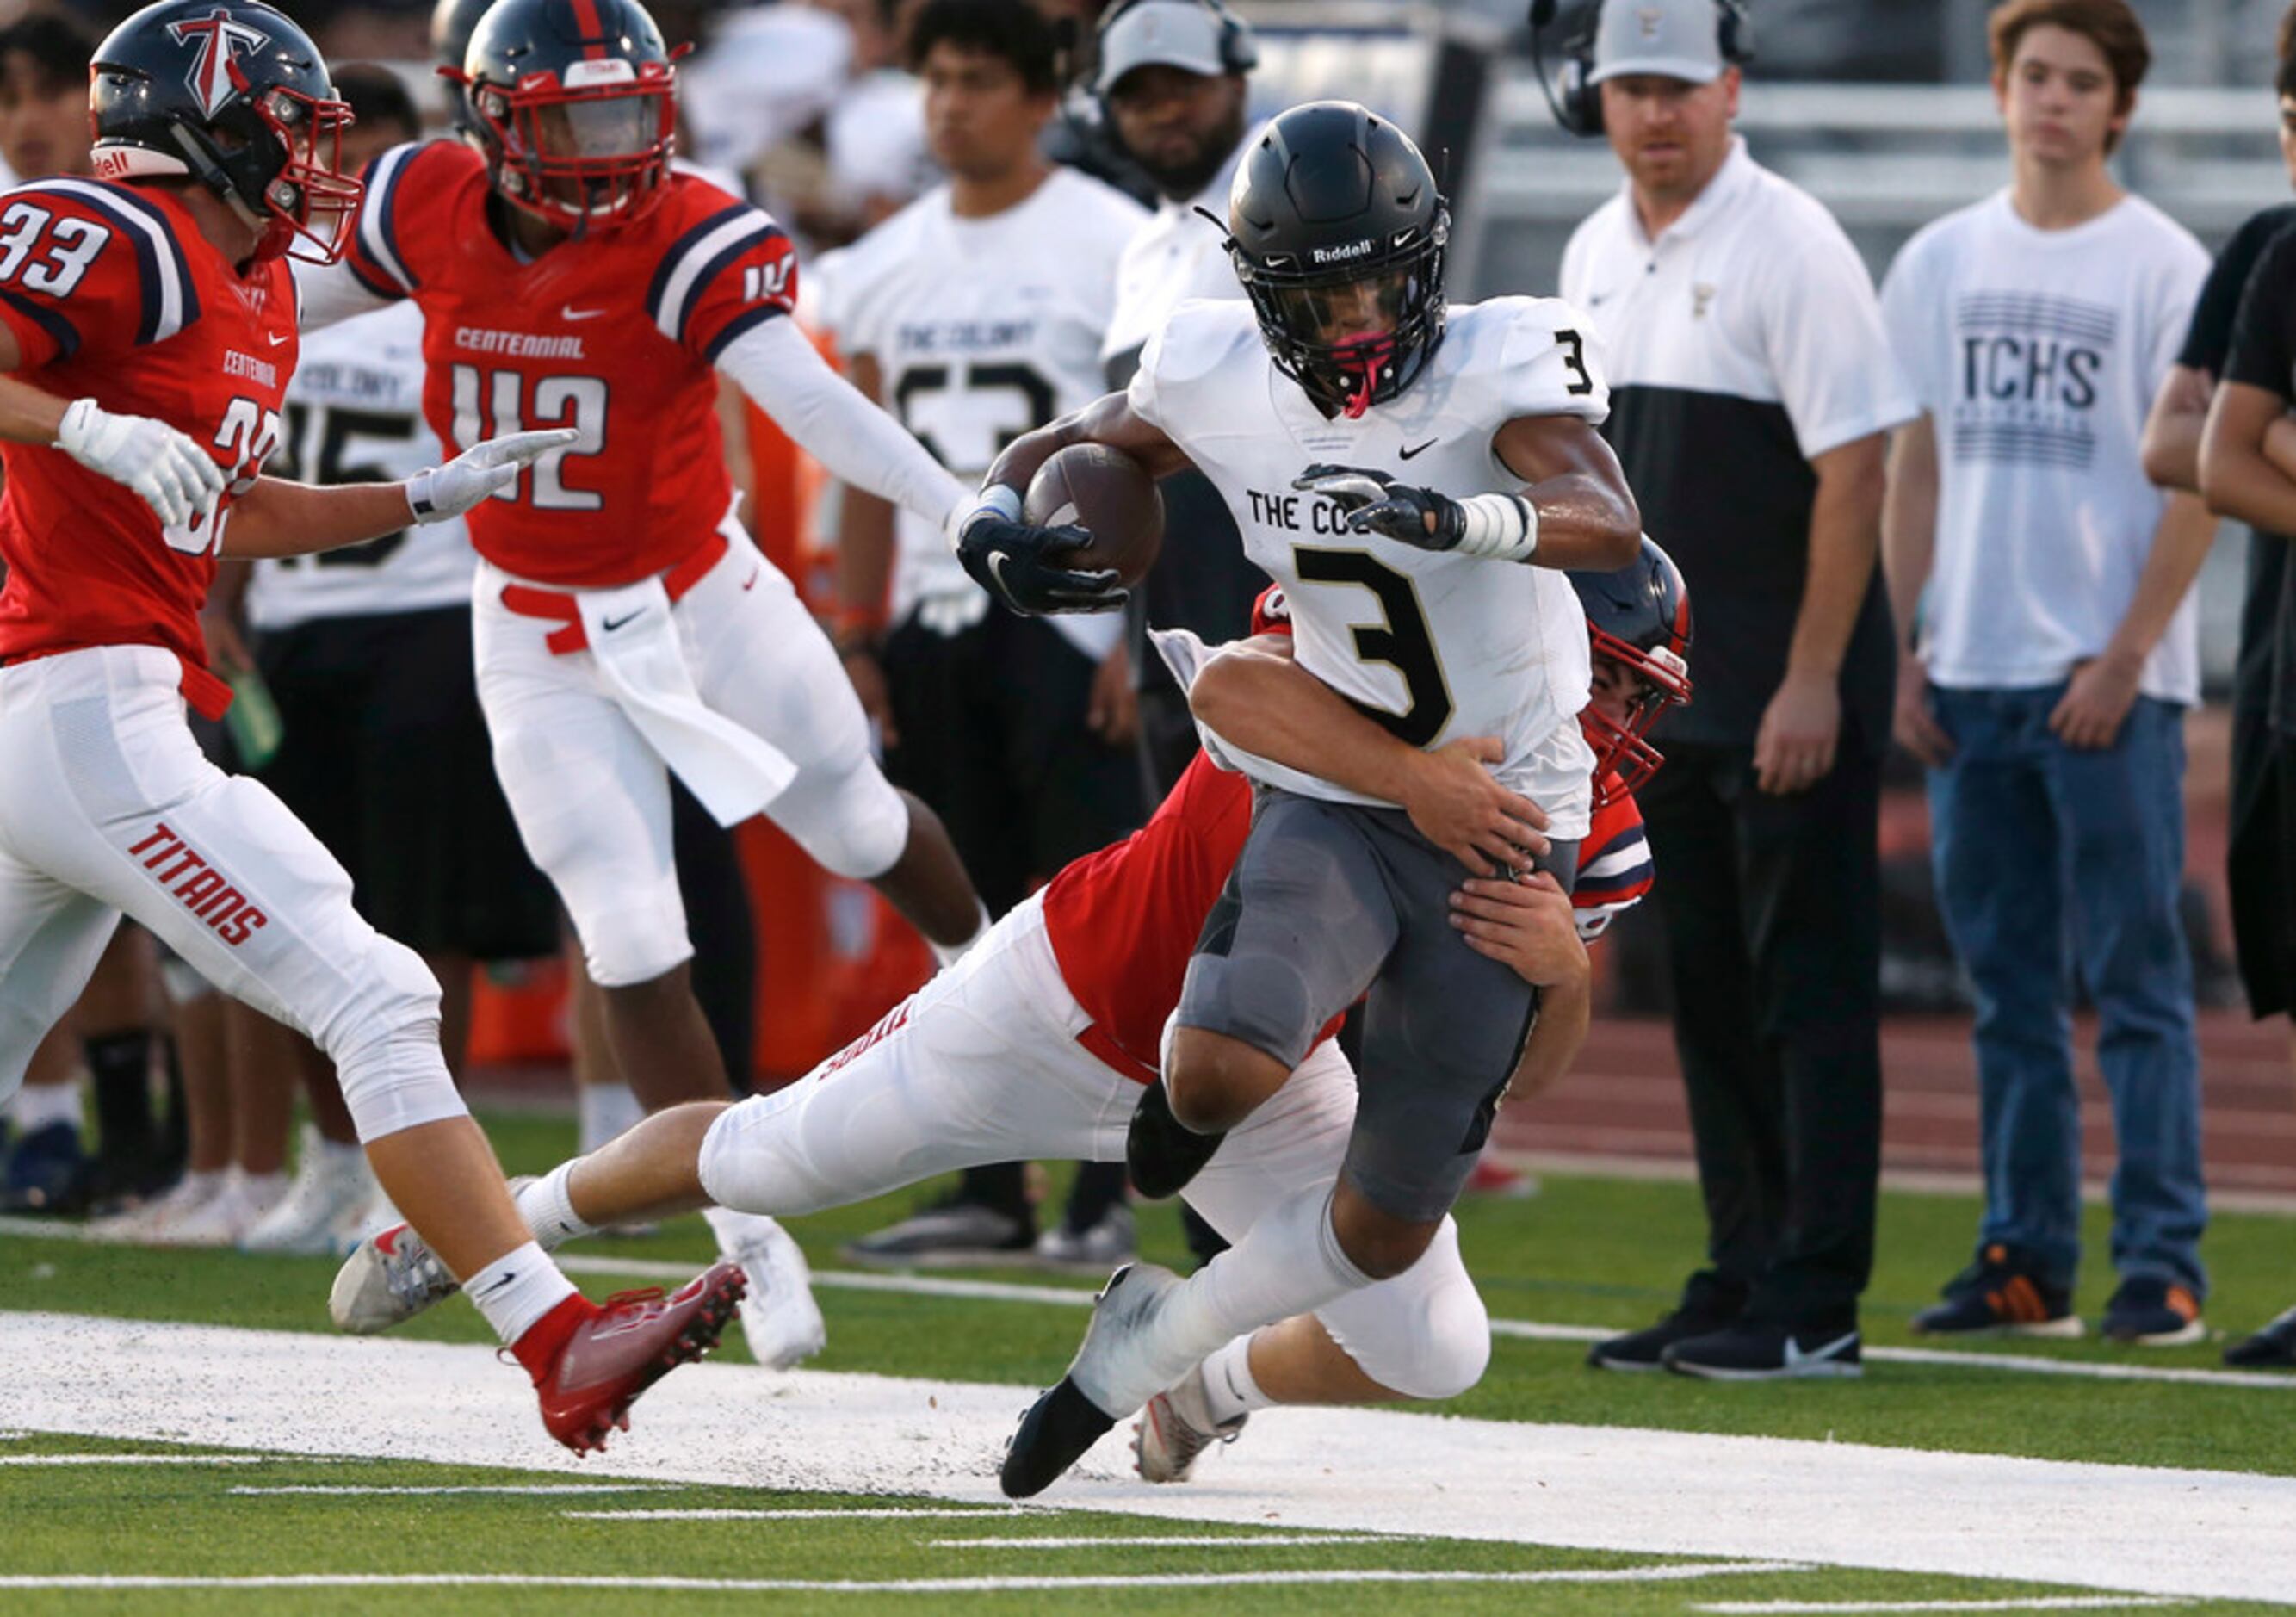 The Colony's Christian Gonzalez (3) runs up the field as Centennial's Diego West (66)...